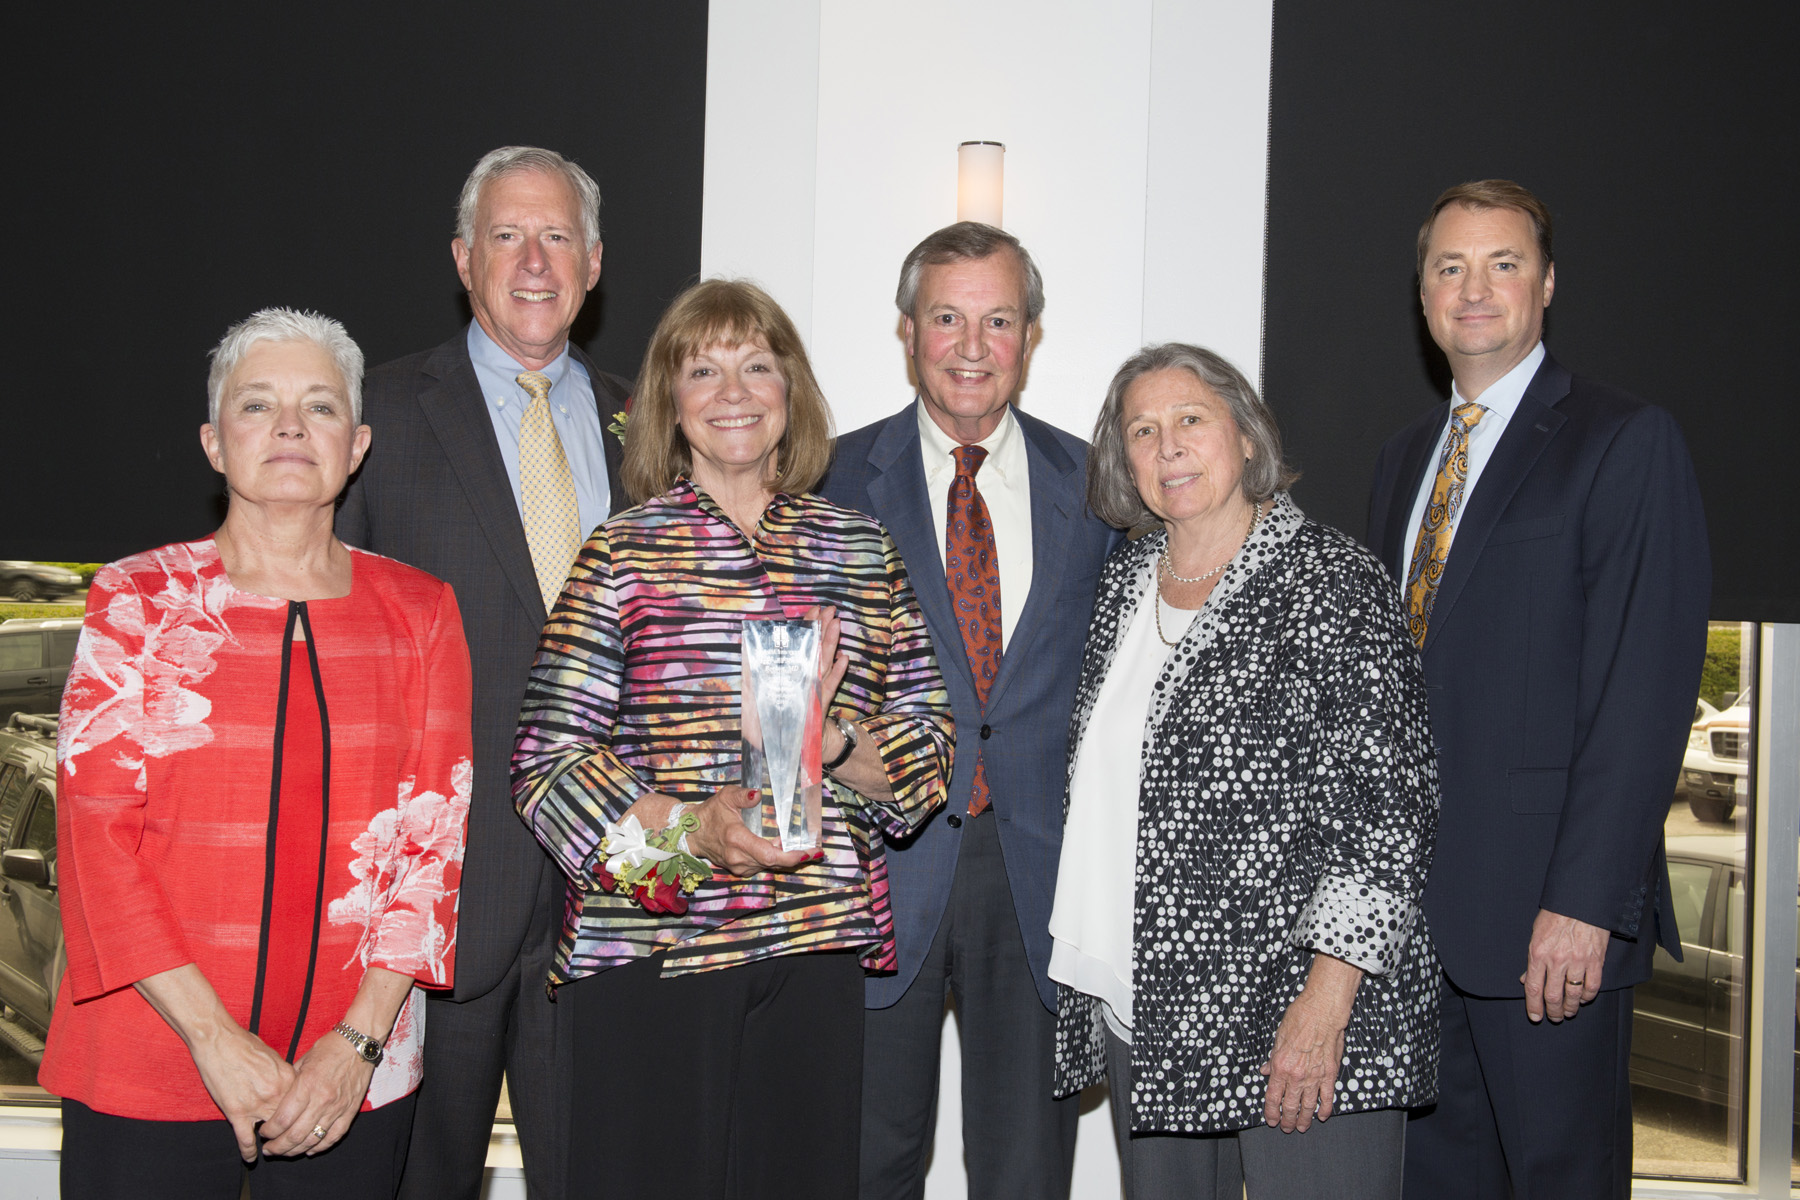 Michael and Peggy Borkon pose with Dr. Melinda Estes, the Wagstaff family and Michael VanDerfhoef with their Foundation Fellow Award